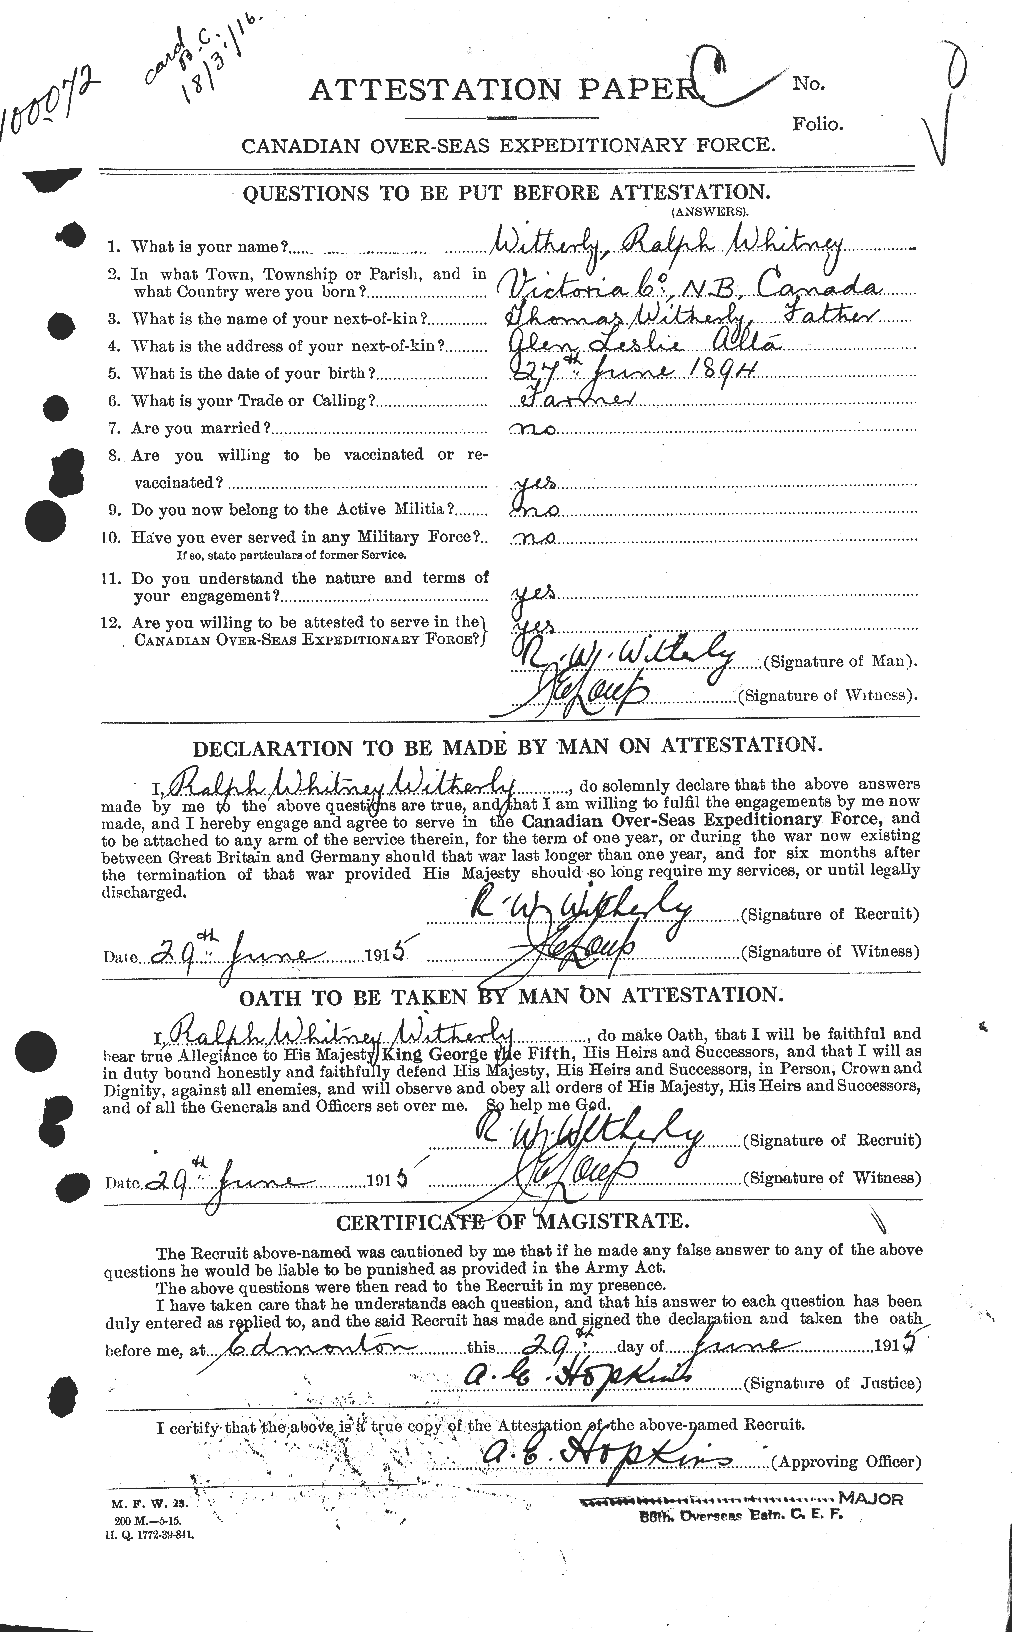 Personnel Records of the First World War - CEF 679945a